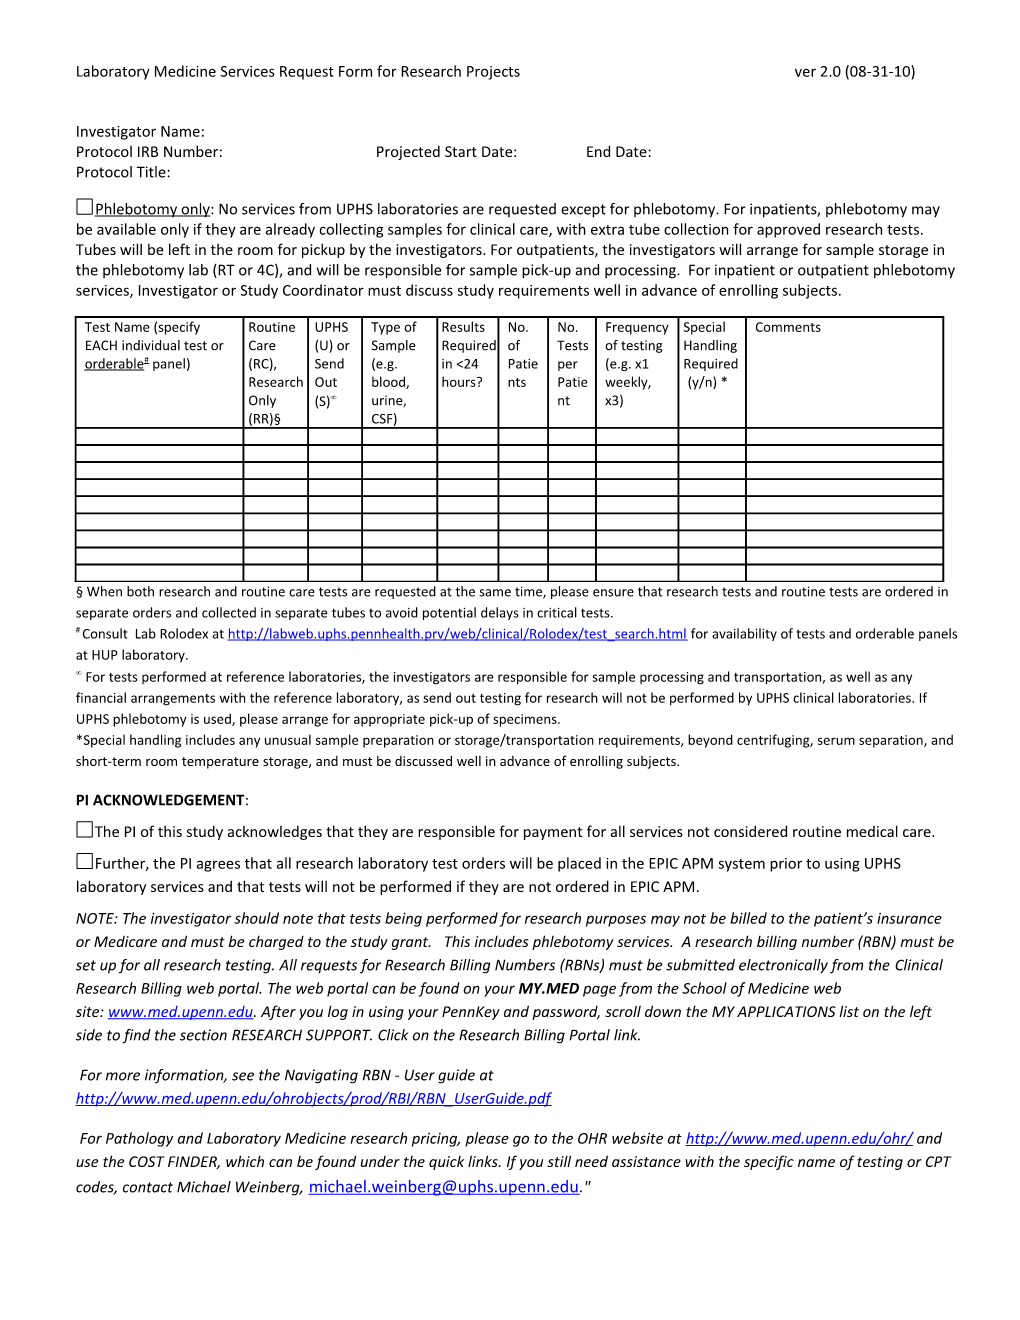 Laboratory Medicine Services Request Form for Research Projectsver 2.0 (08-31-10)